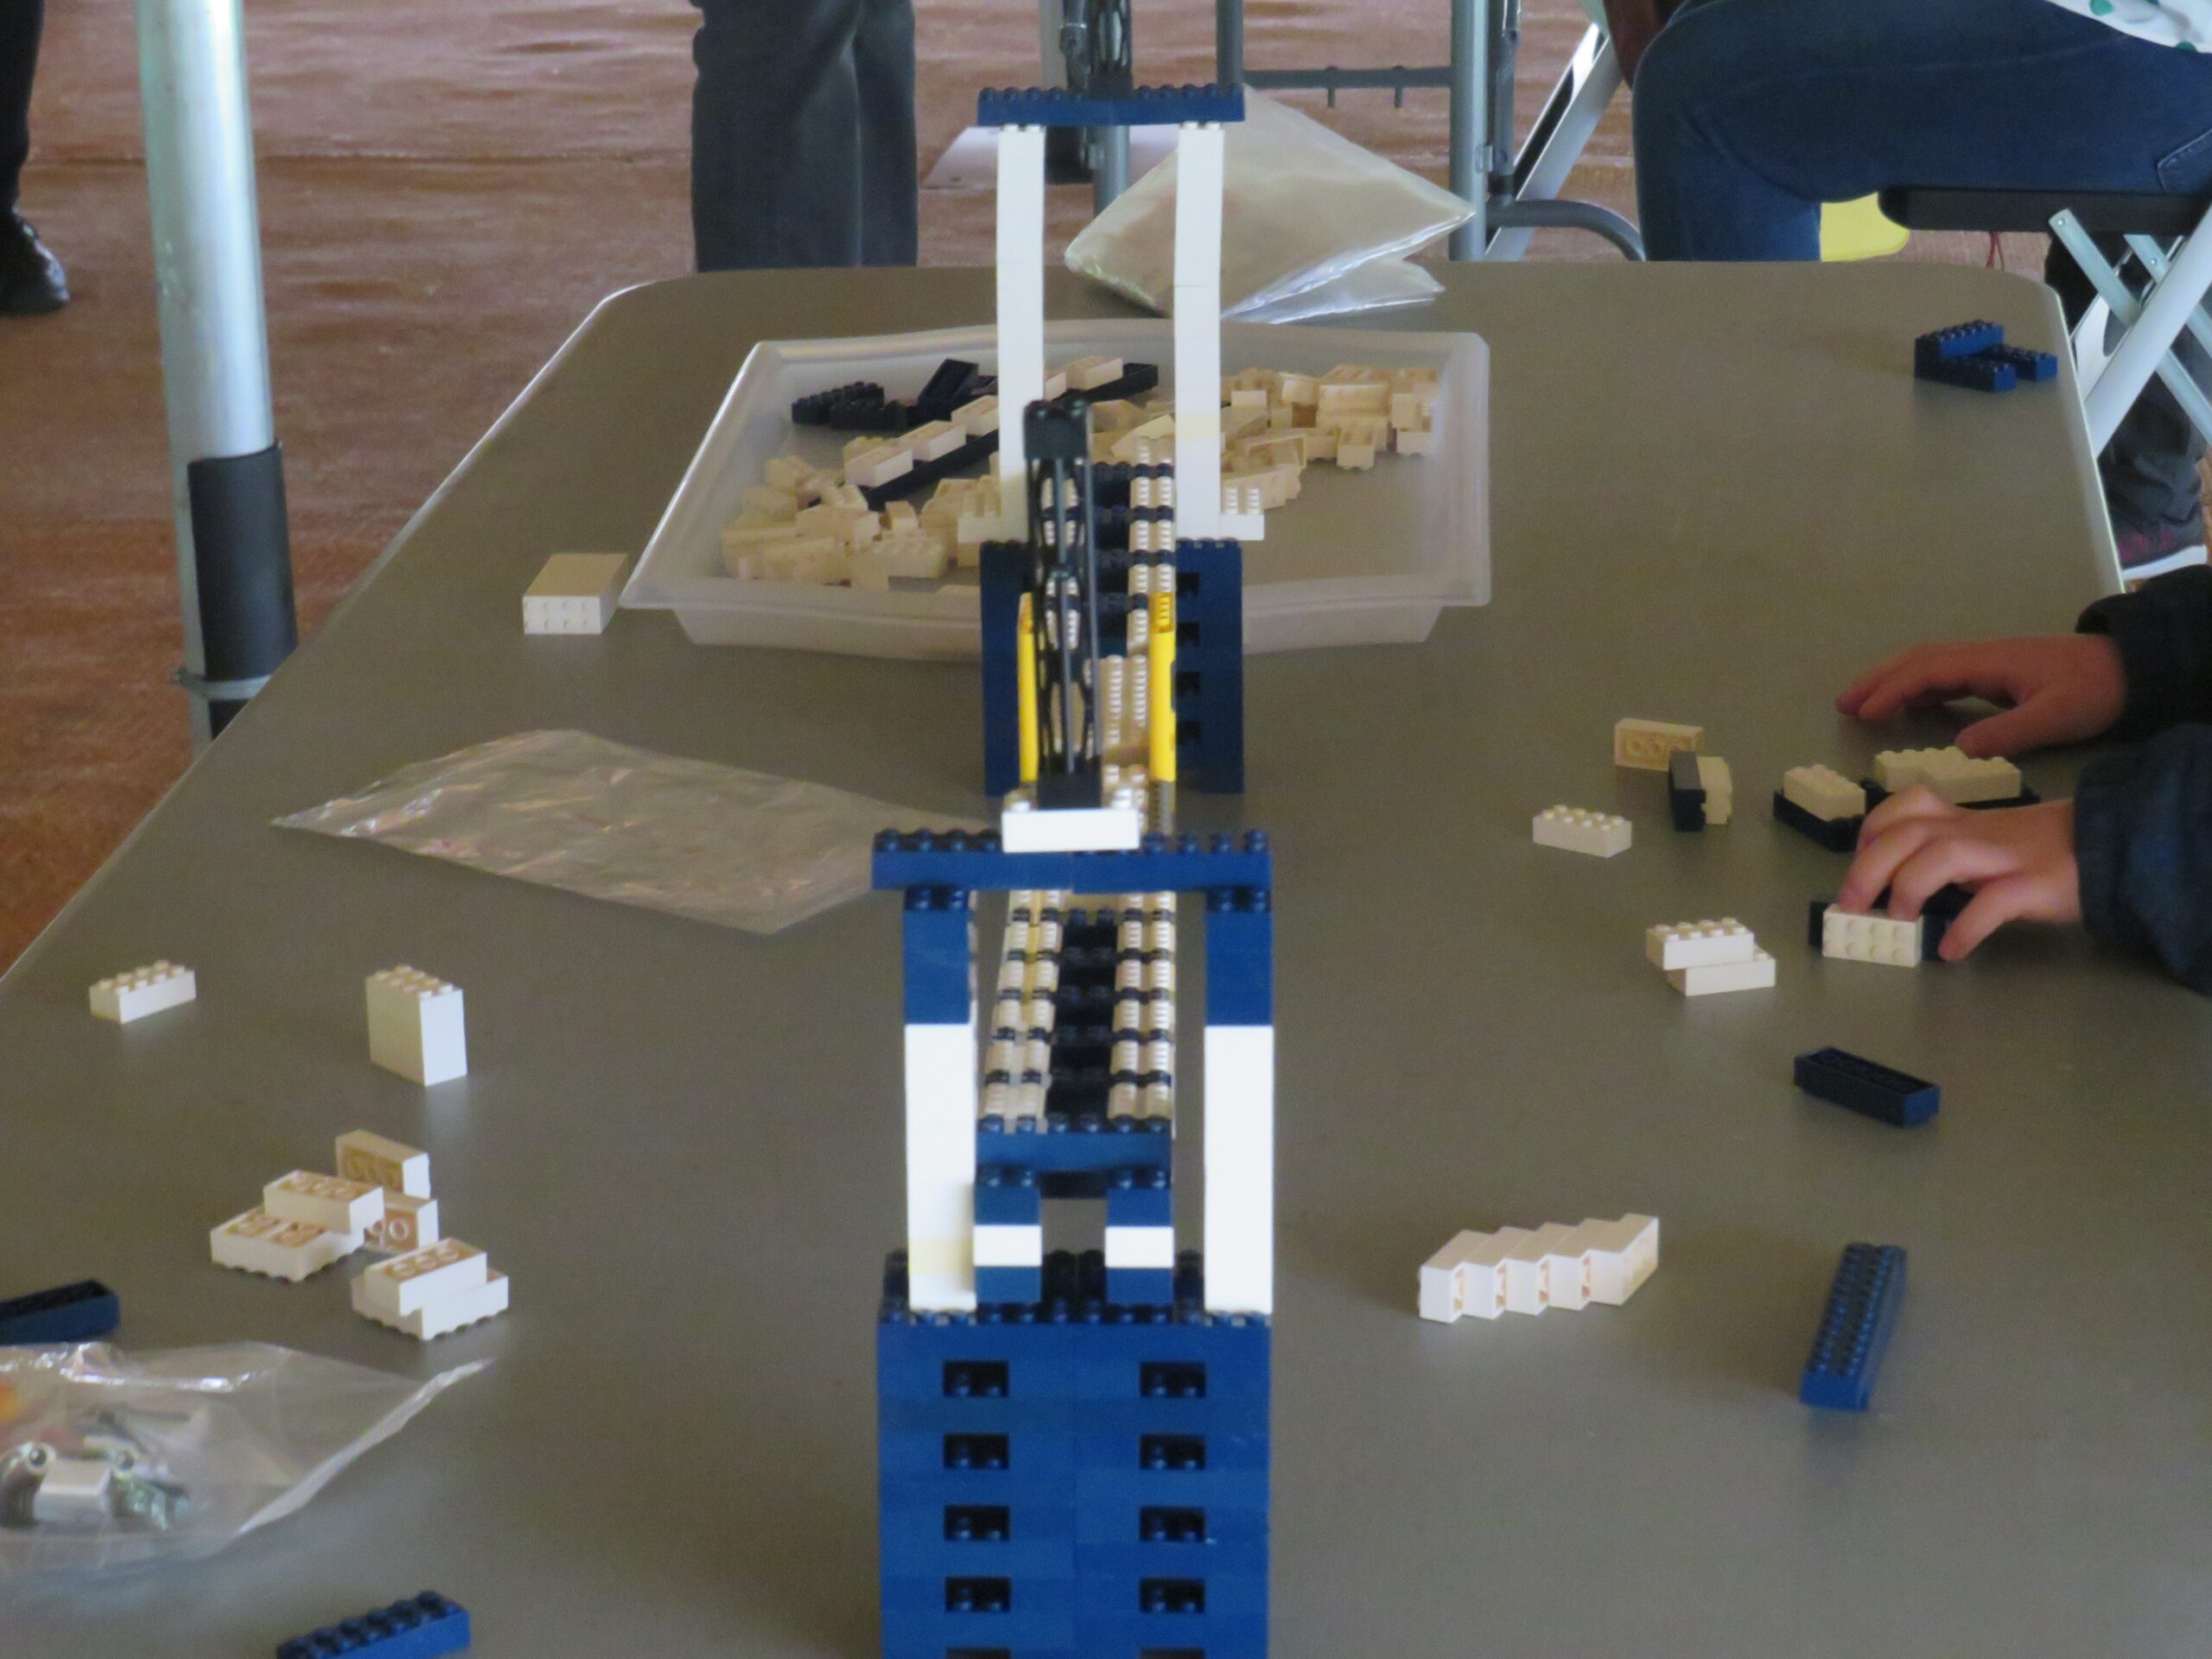 Bridge model made with white and blue lego pieces with loose lego pieces around it on a table